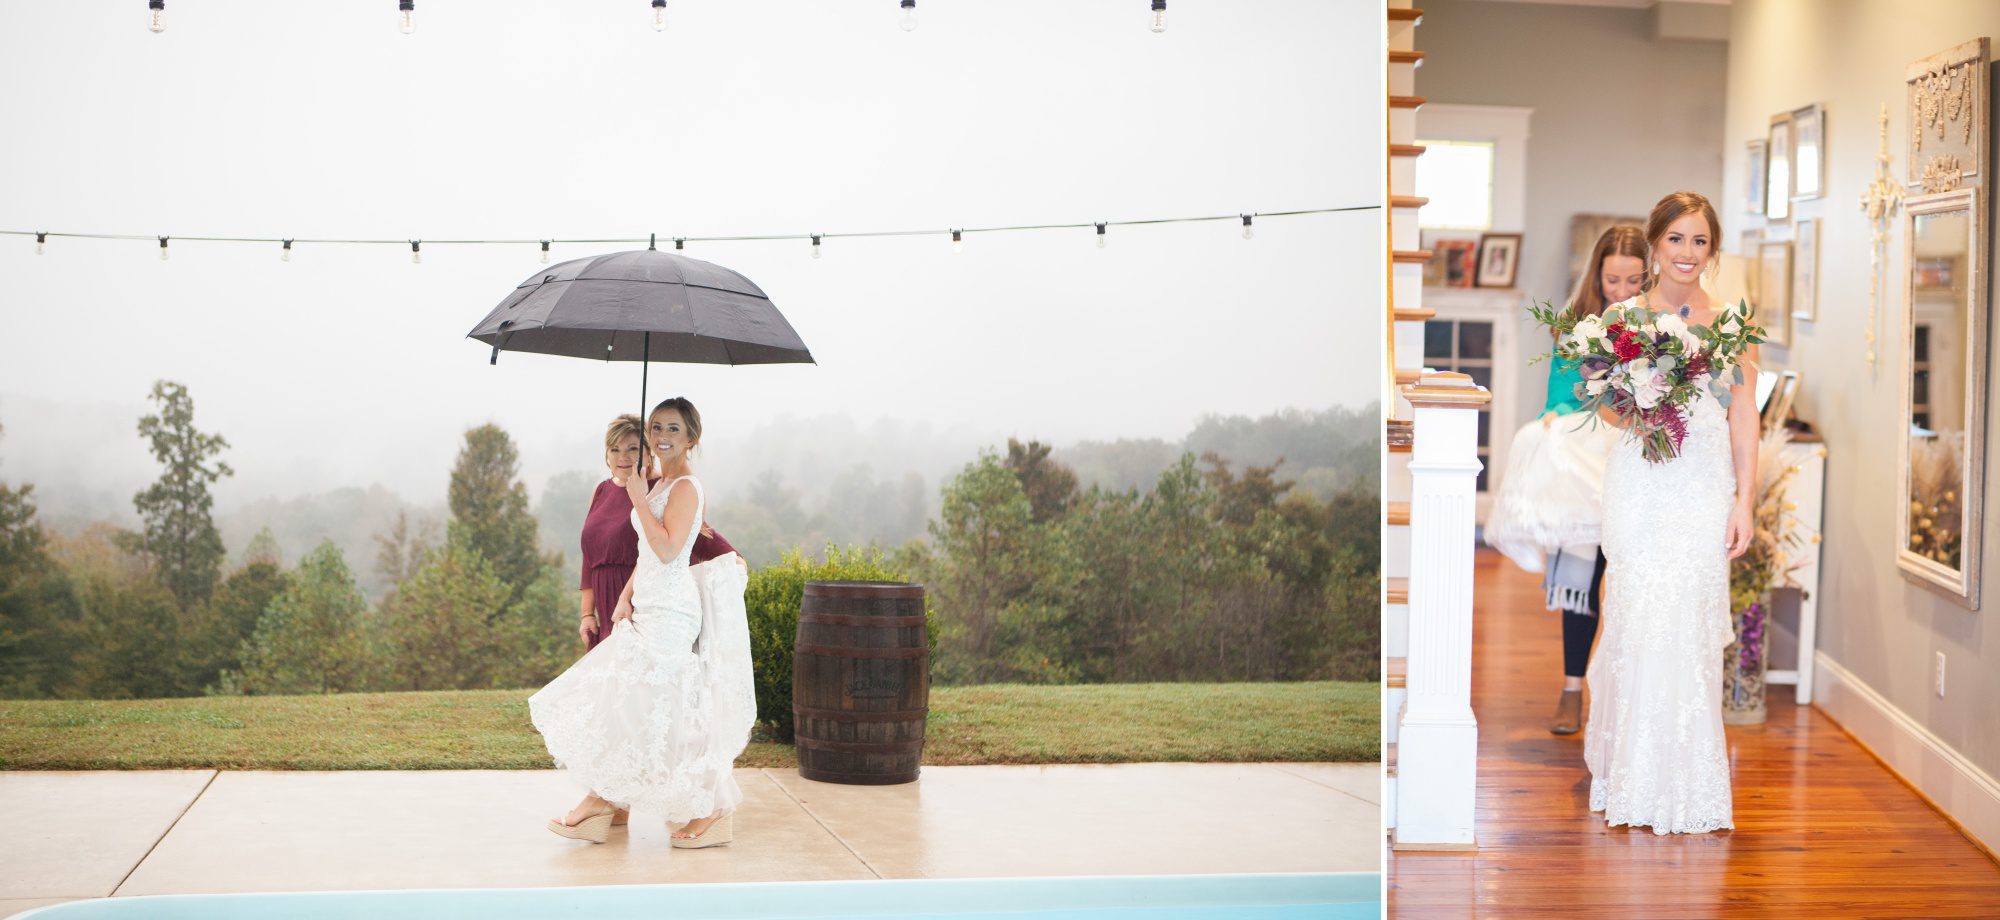 Rainy day wedding, walking to first look before wedding reception details before wedding ceremony photography at Front Porch Farms, Wedding photography by Krista Lee